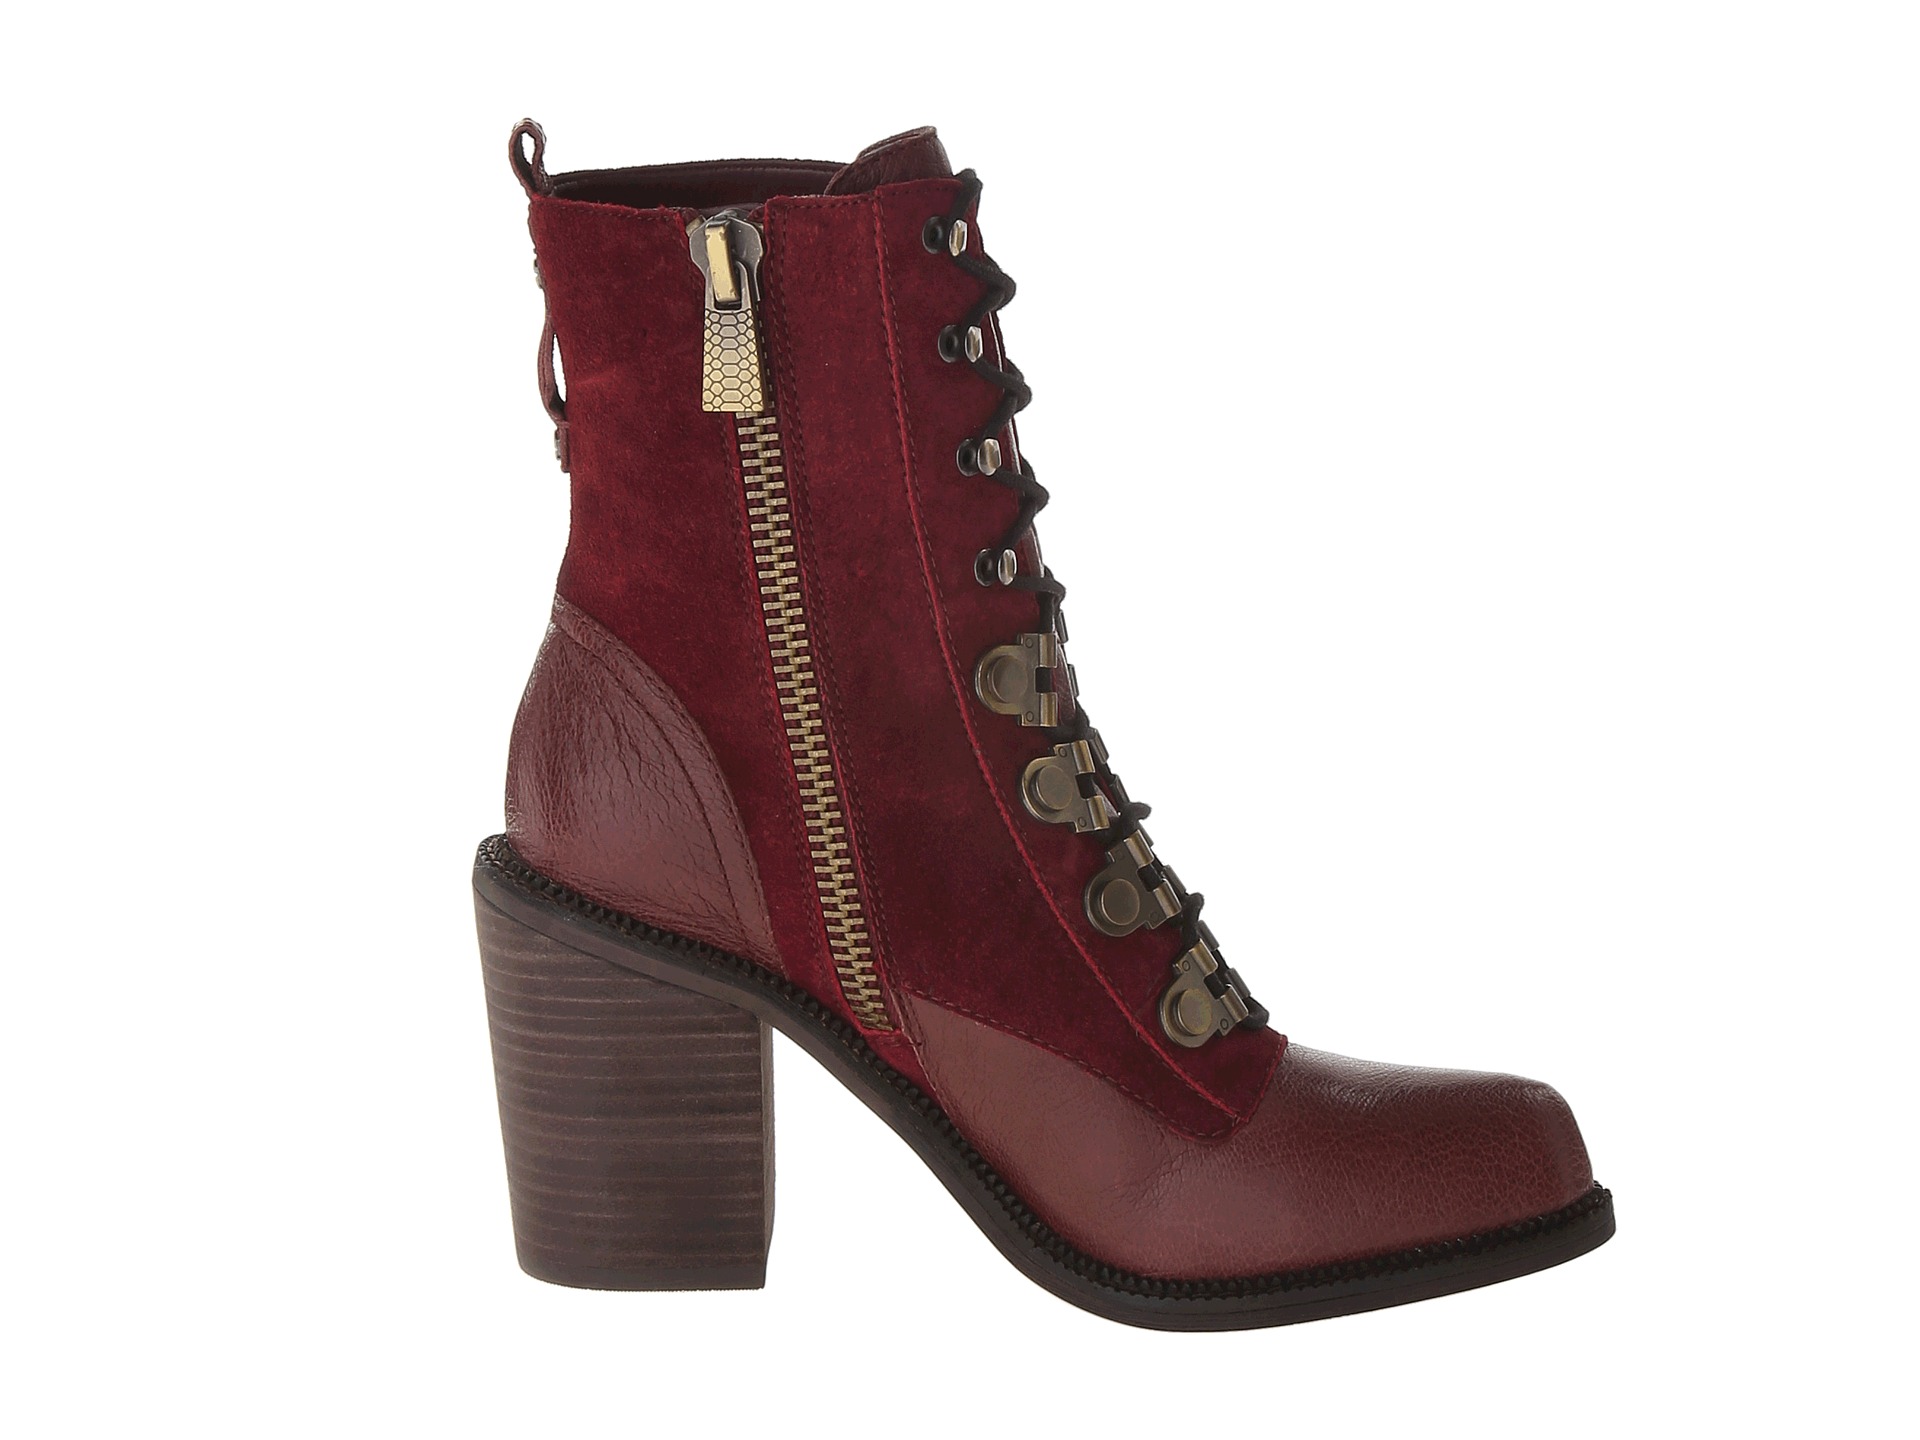 No results for luxury rebel mara bordeaux - Search Zappos